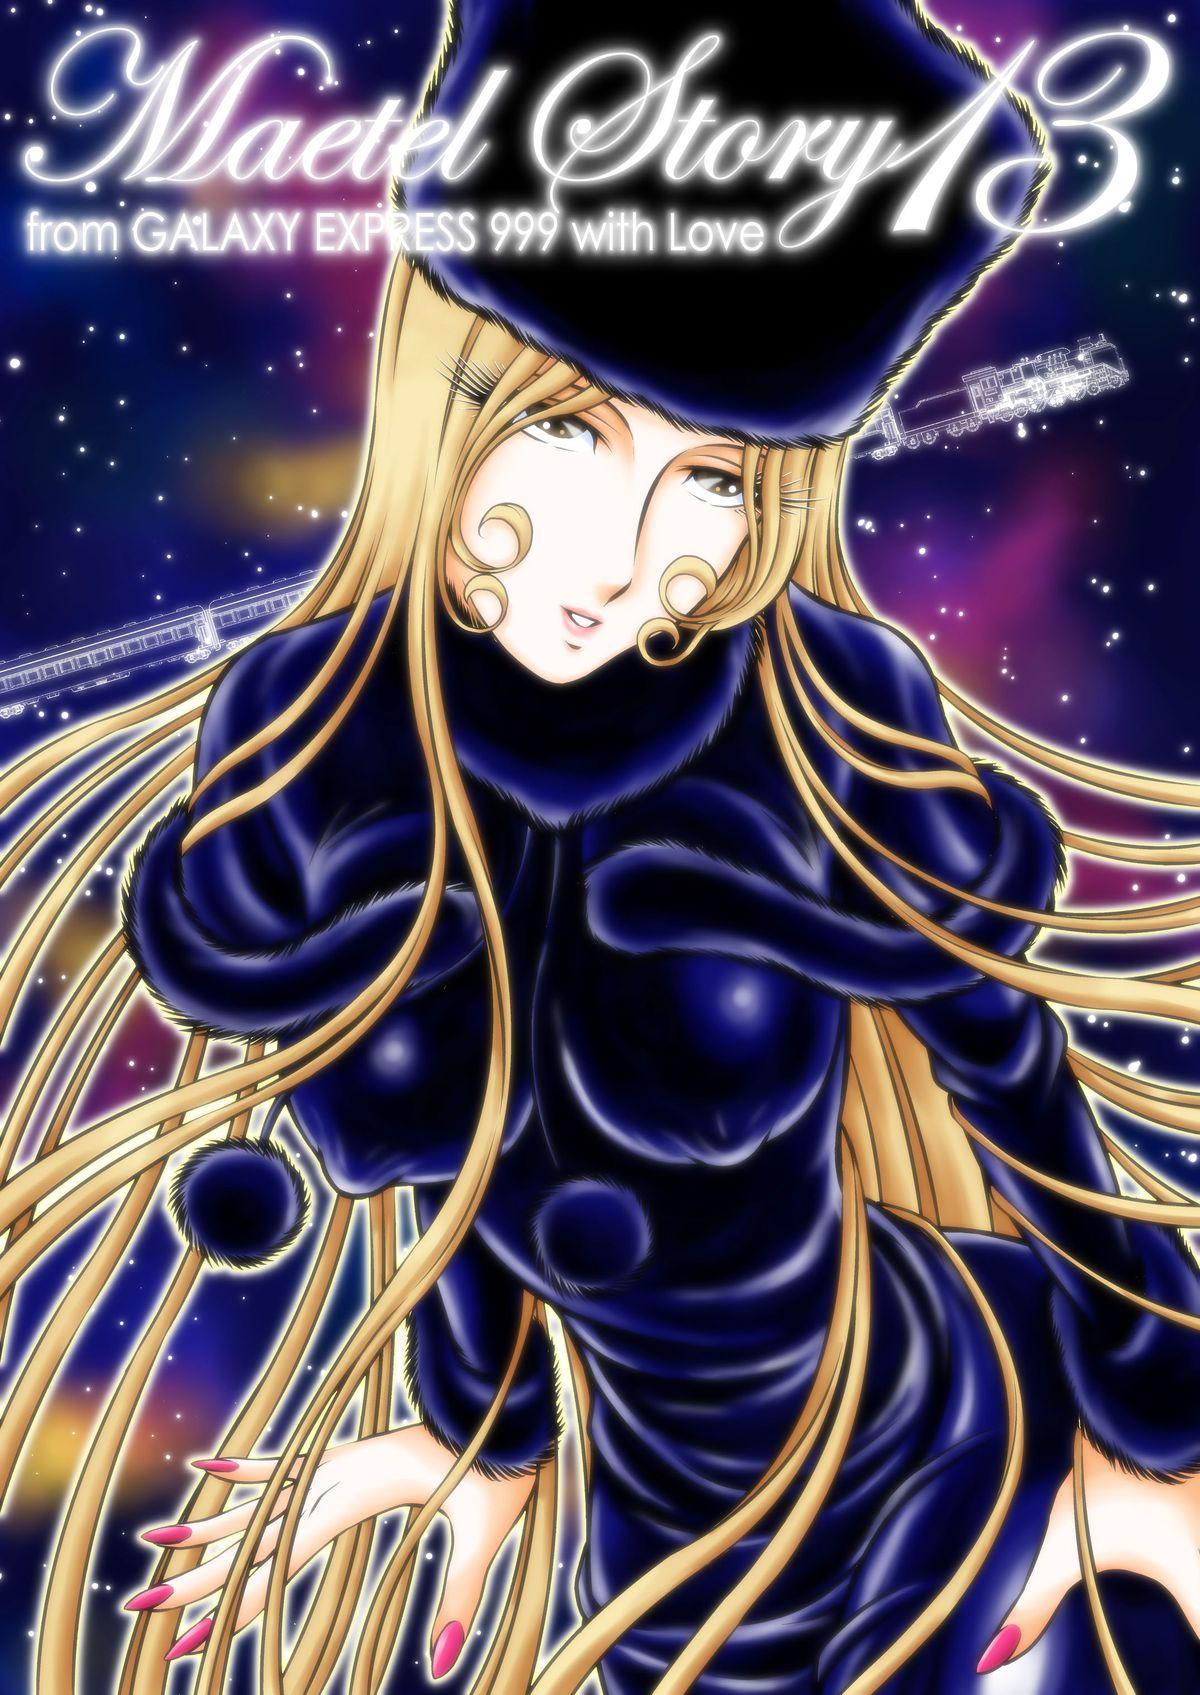 Homemade Maetel Story 13 - Galaxy express 999 Hot Brunette - Page 1